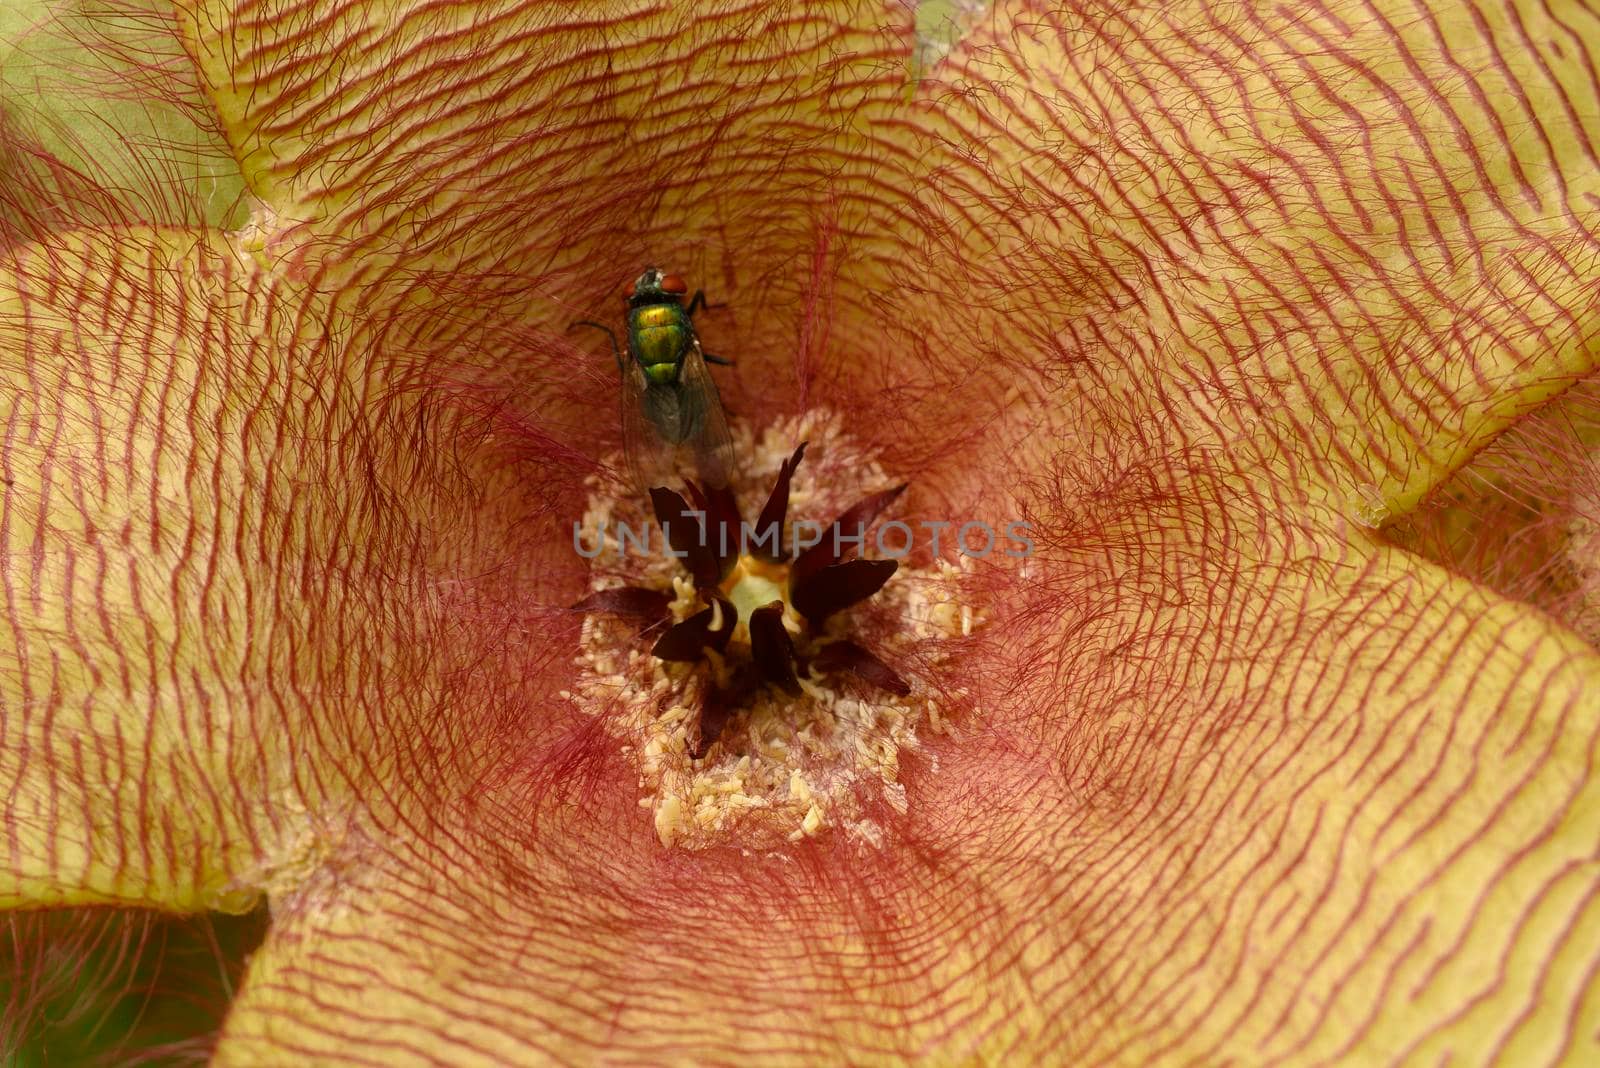 Flower detail of Stapelia gigantea,  Zulu giant, carrion plant, toad plant with green flies laying eggs at its center.